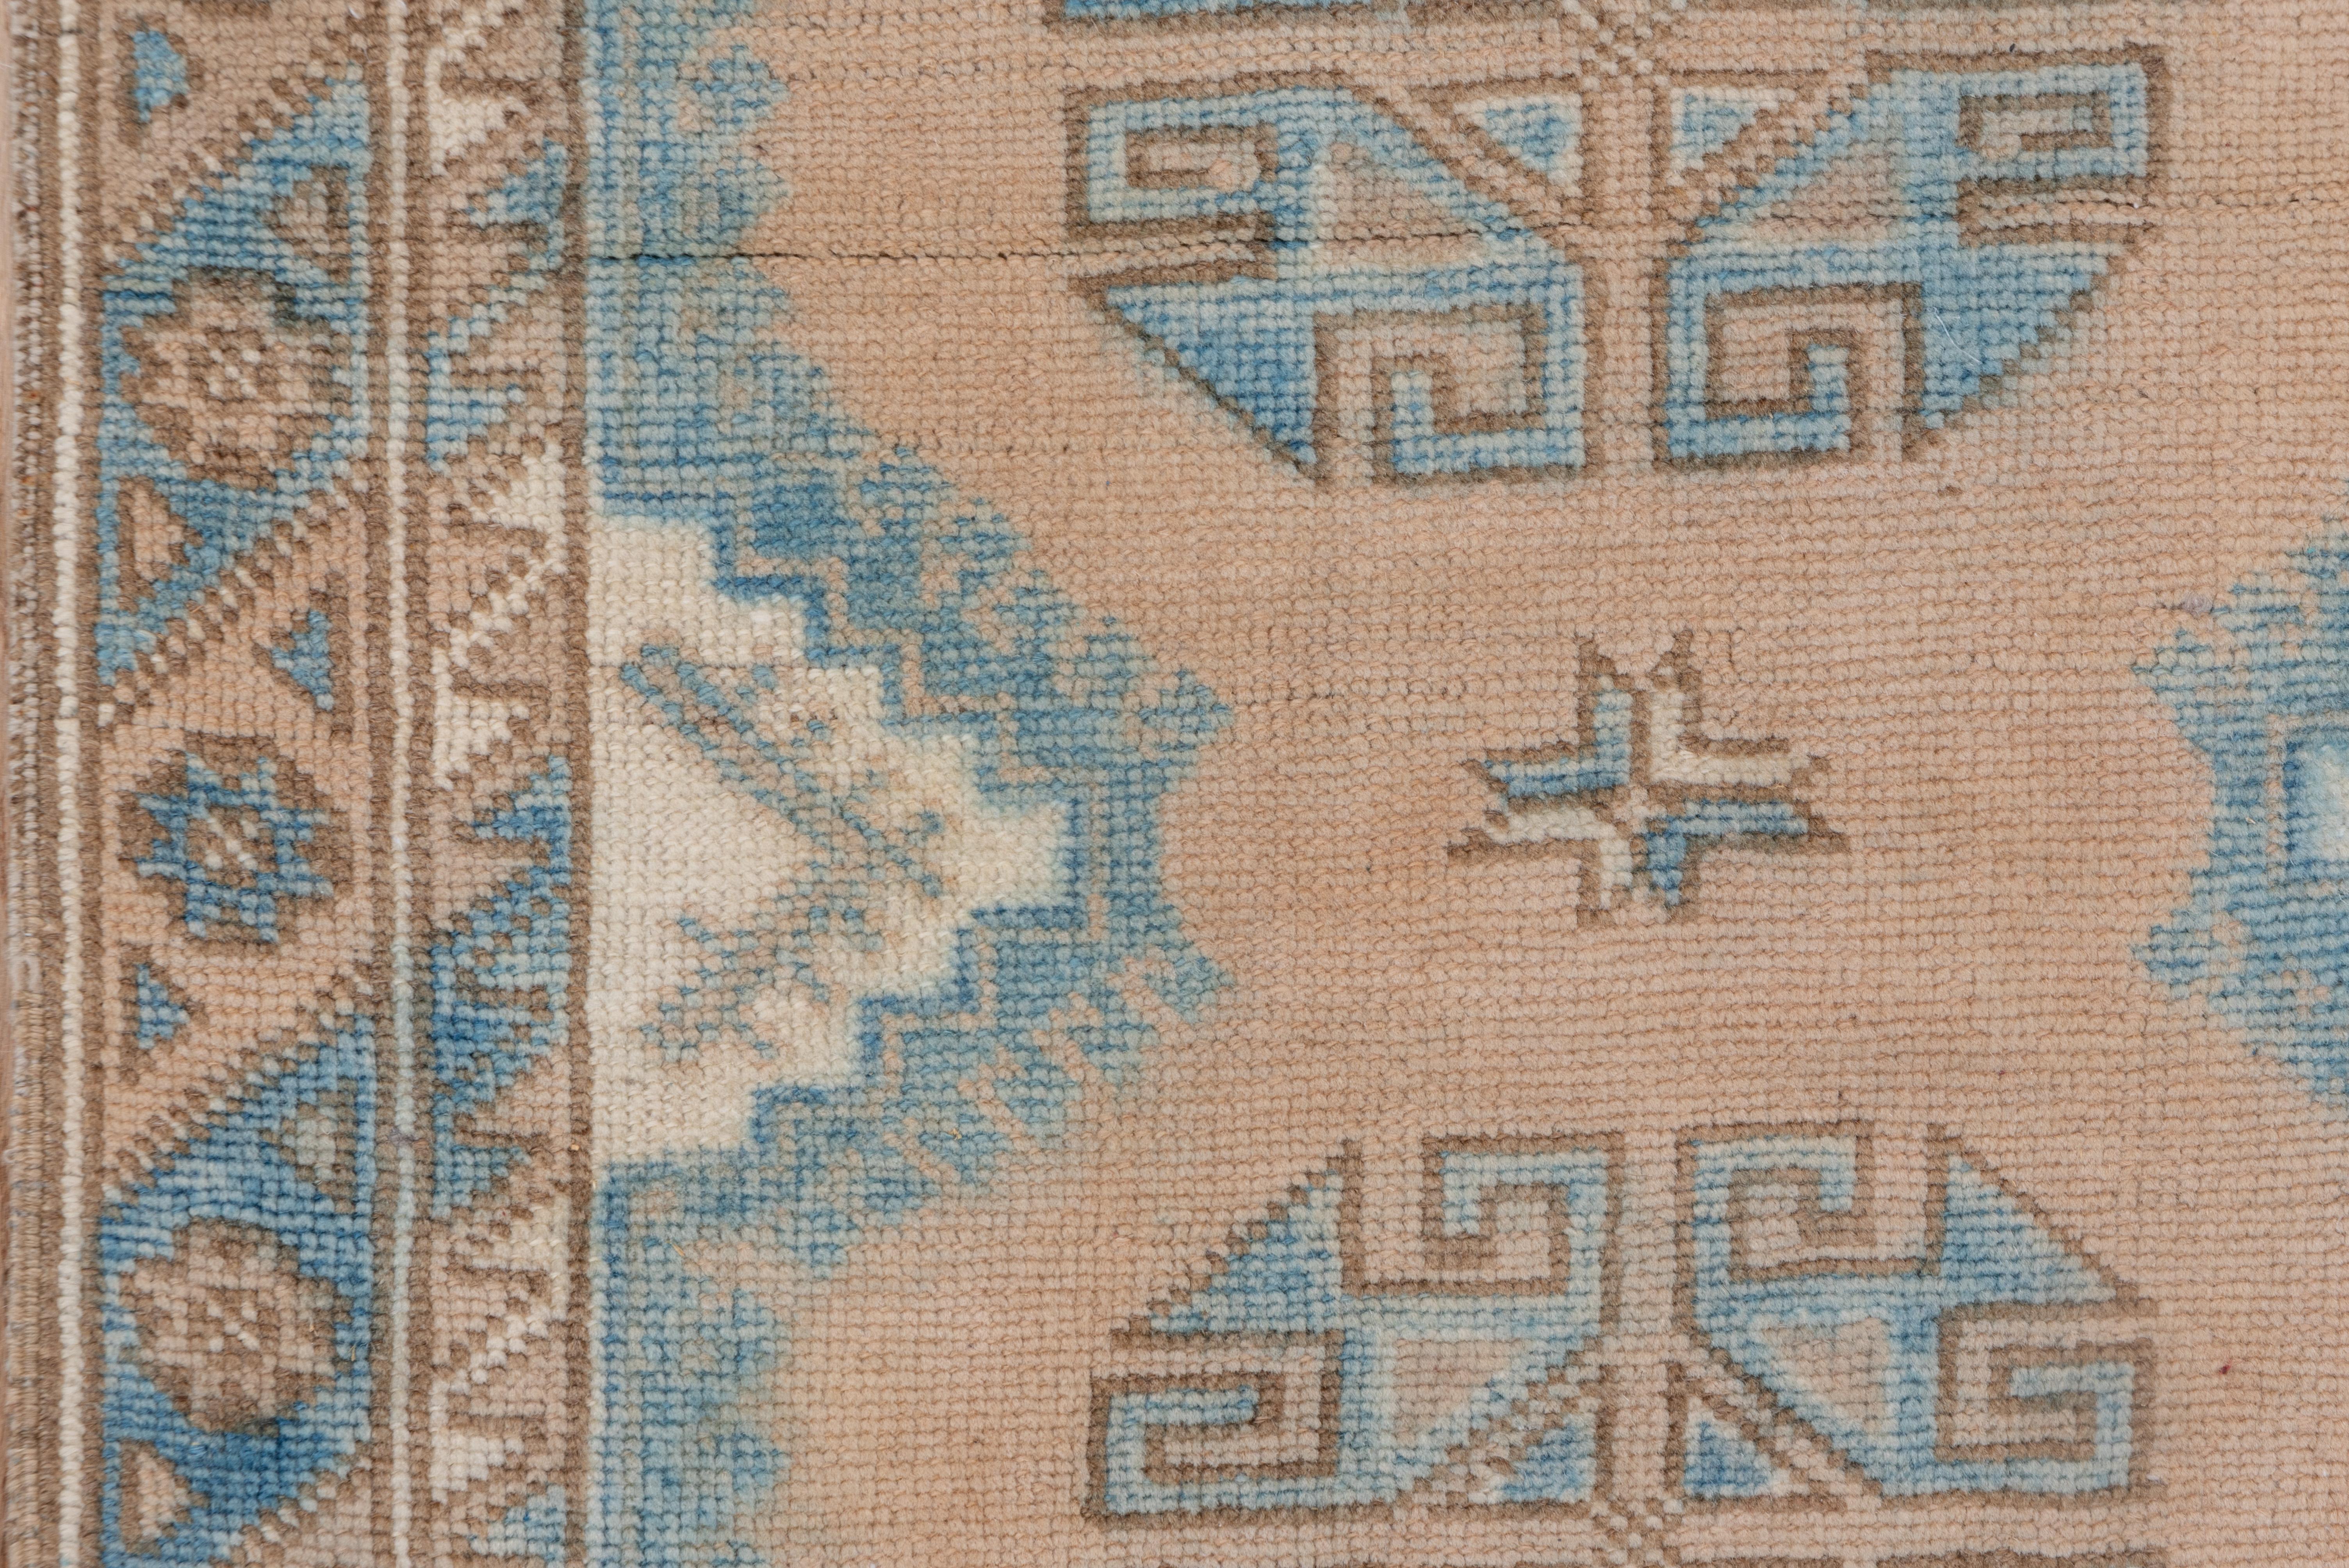 Eliko Rugs by David Ariel Vintage Peach and Blue Oushak Short Runner In Good Condition For Sale In New York, NY